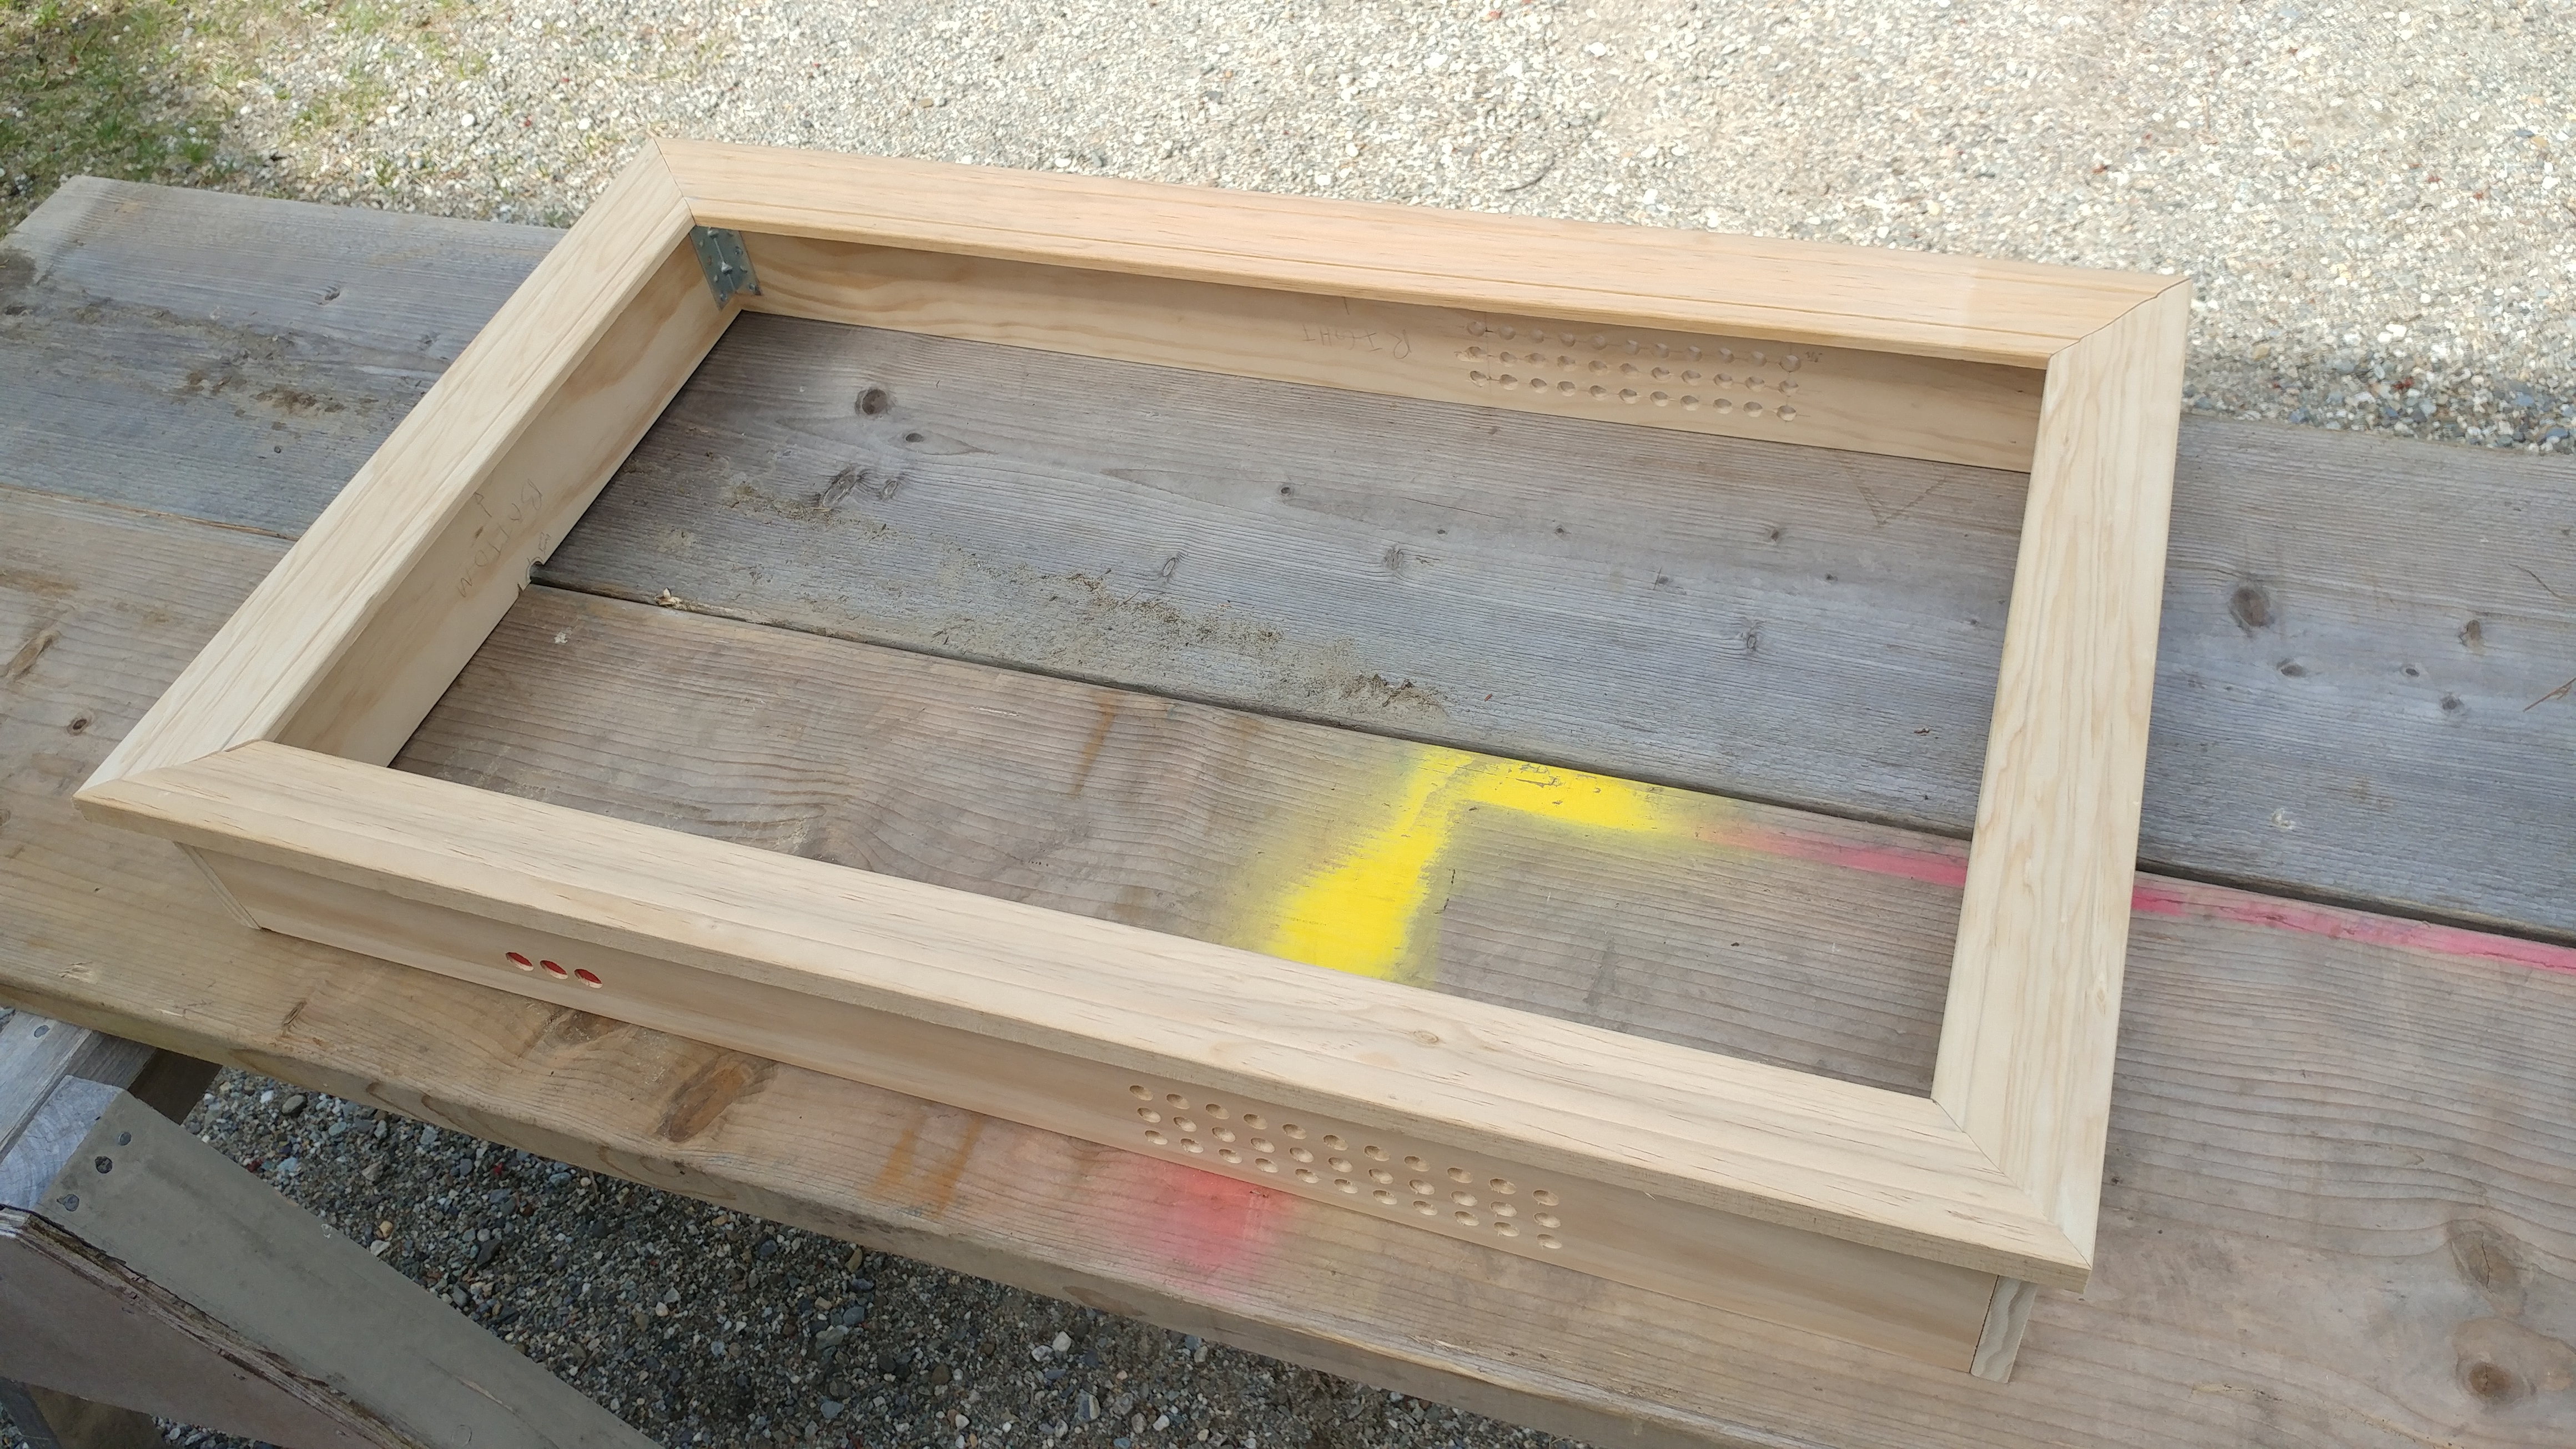 Trim pieces finish off the box frame